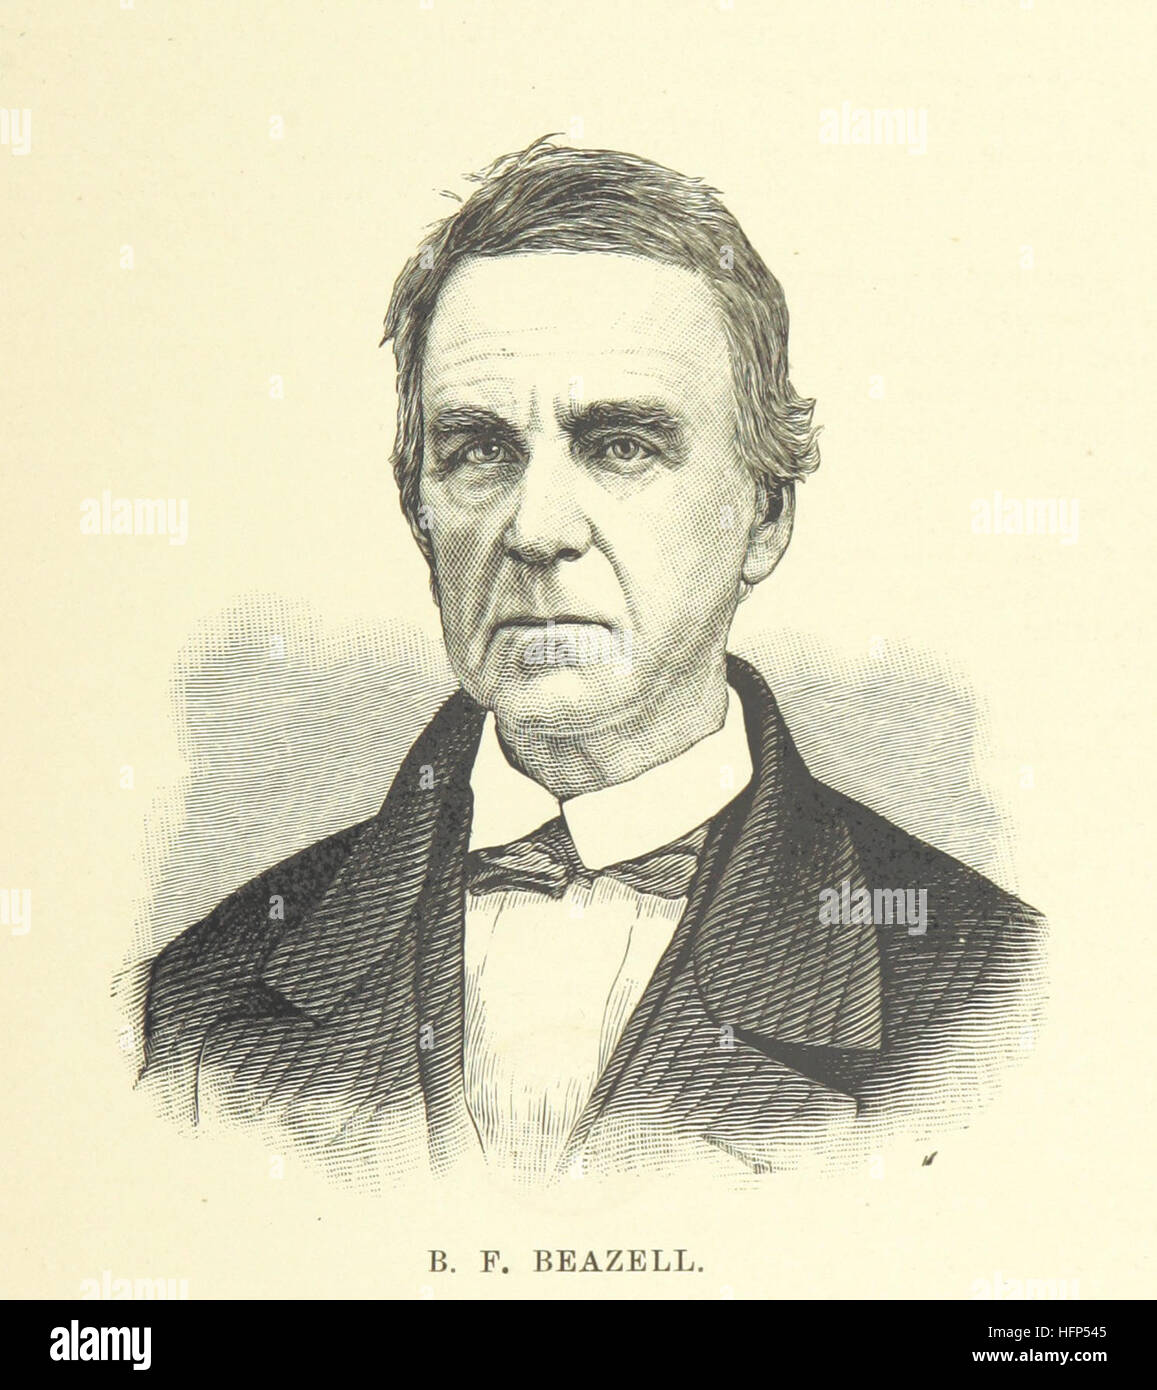 History of the County of Westmoreland, Pennsylvania, with biographical sketches of many of its ... prominent men. Edited by G. D. Albert. Illustrated Image taken from page 693 of 'History of the County Stock Photo